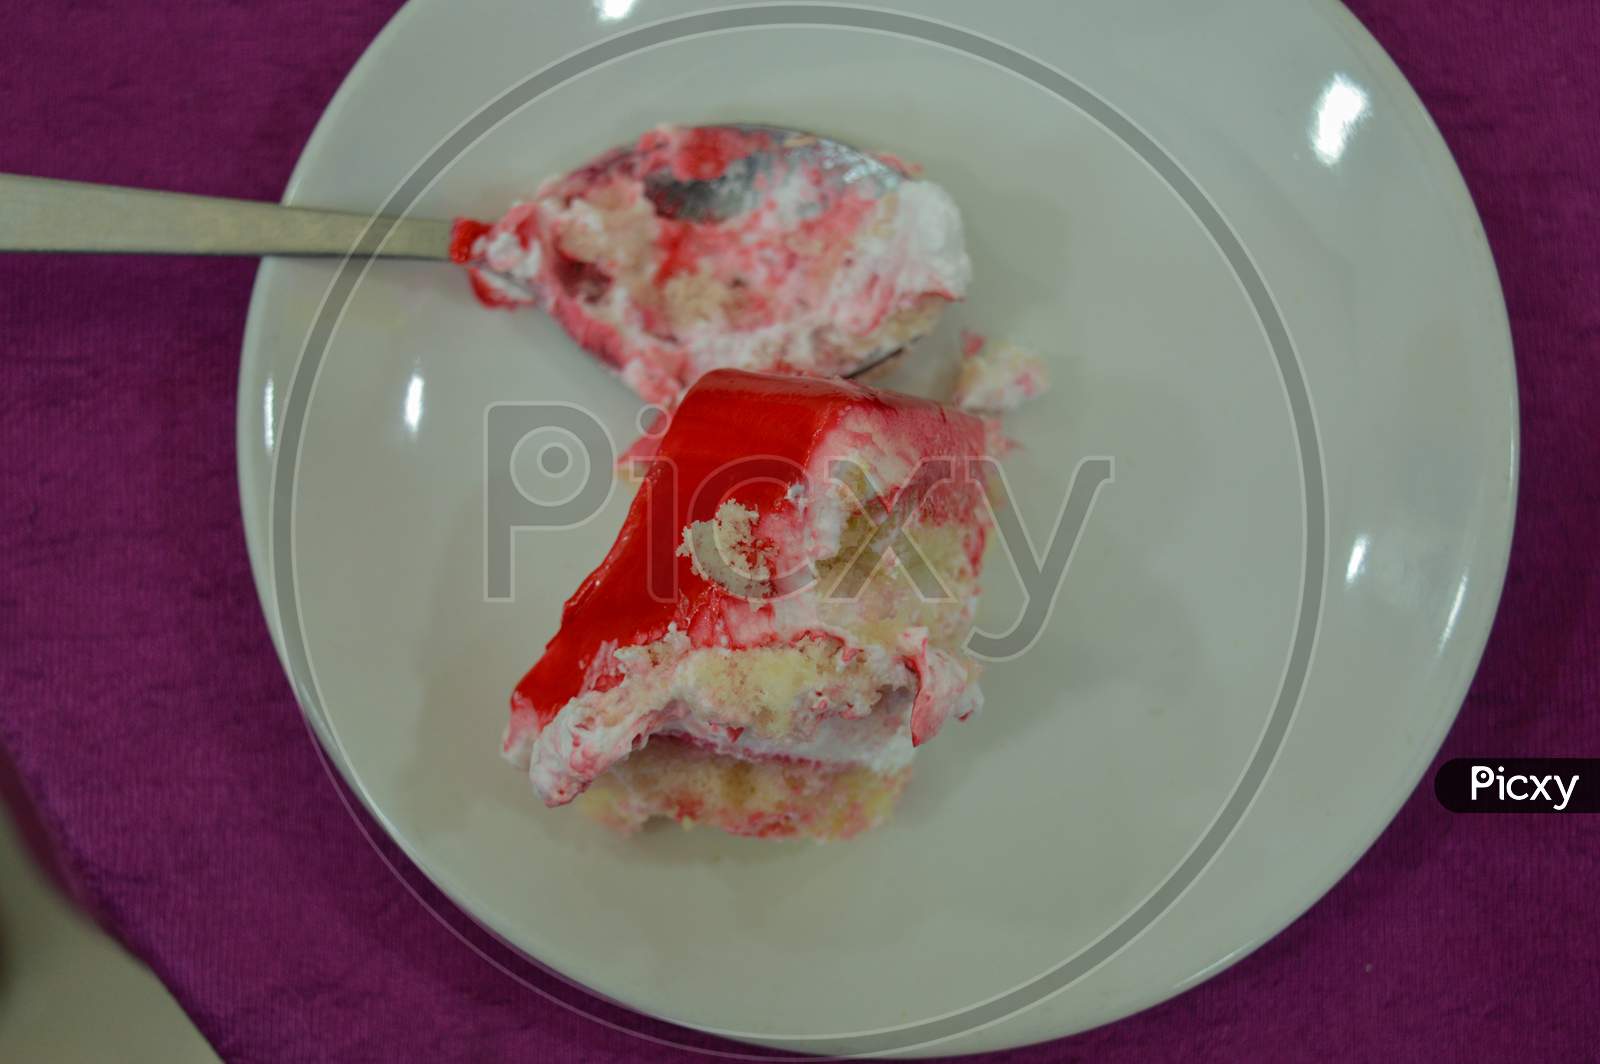 A Beautiful Piece Of Strawberry Cake And Cream Serve On White Plate Isolated On Purple Table Cloth.